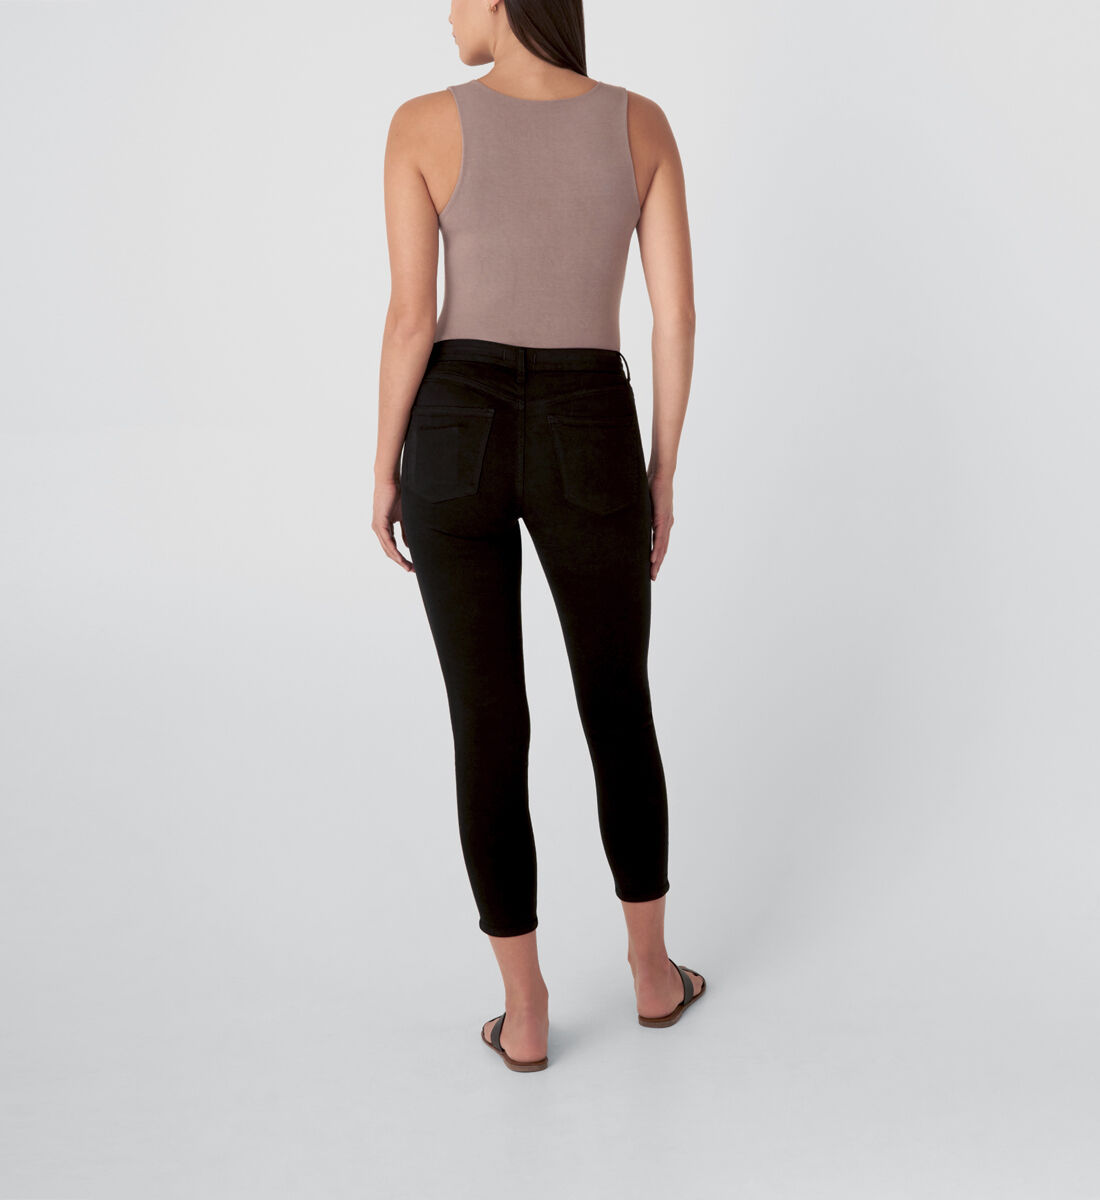 Most Wanted Mid Rise Skinny Jeans,Black Back